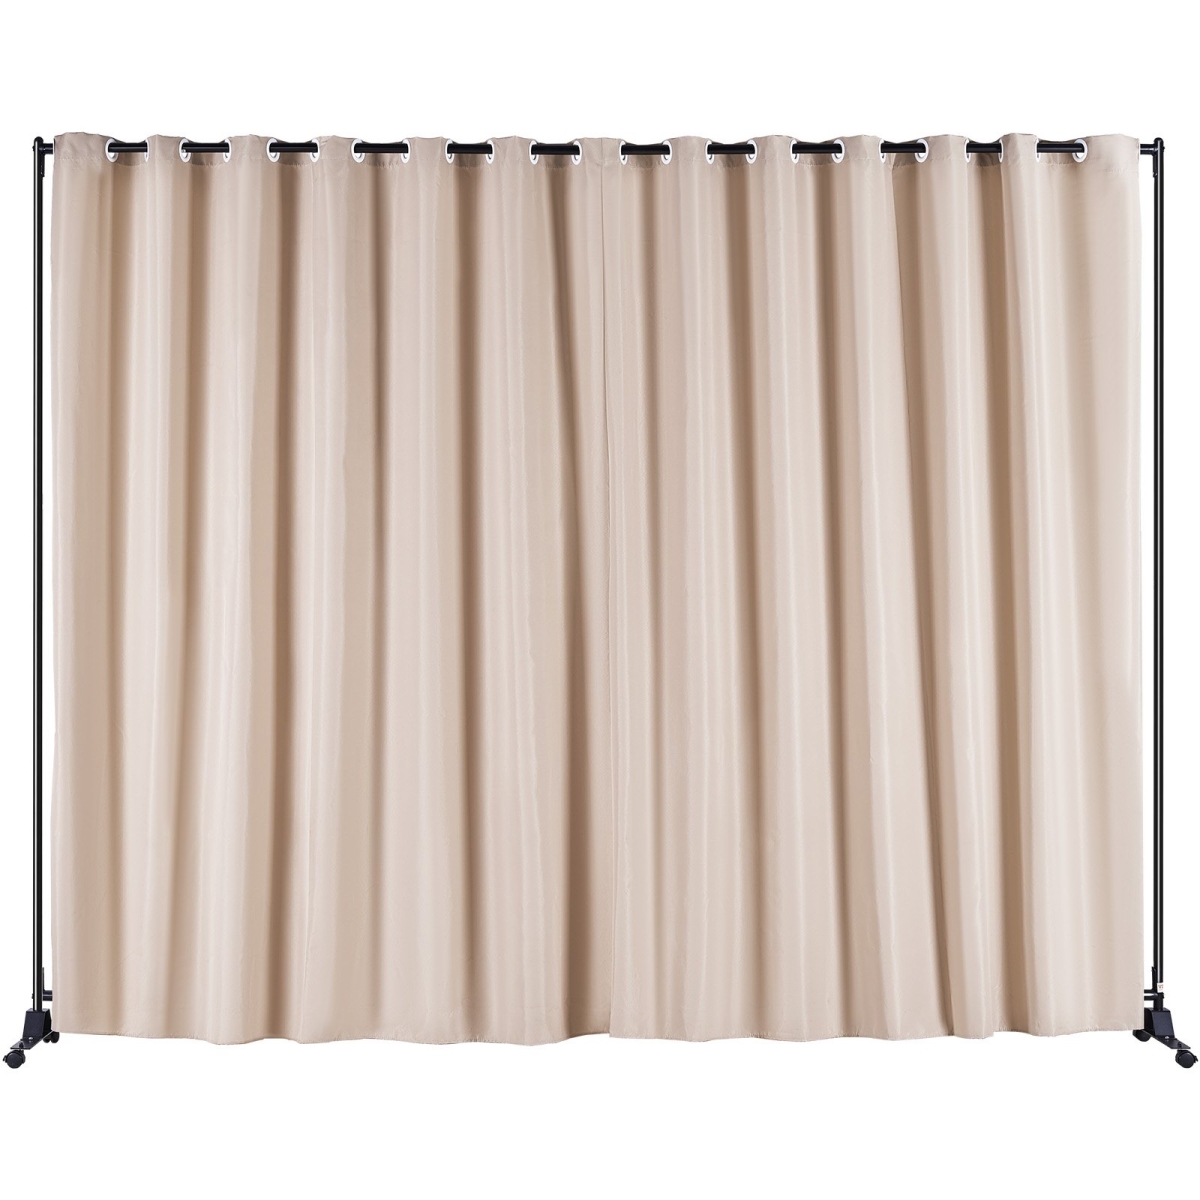 Picture of Vevor BLP196120INCHJCYWV0 8 x 10 ft. Portable Panel Room Divider with Wheels Curtain Divider Stand&#44; Khaki